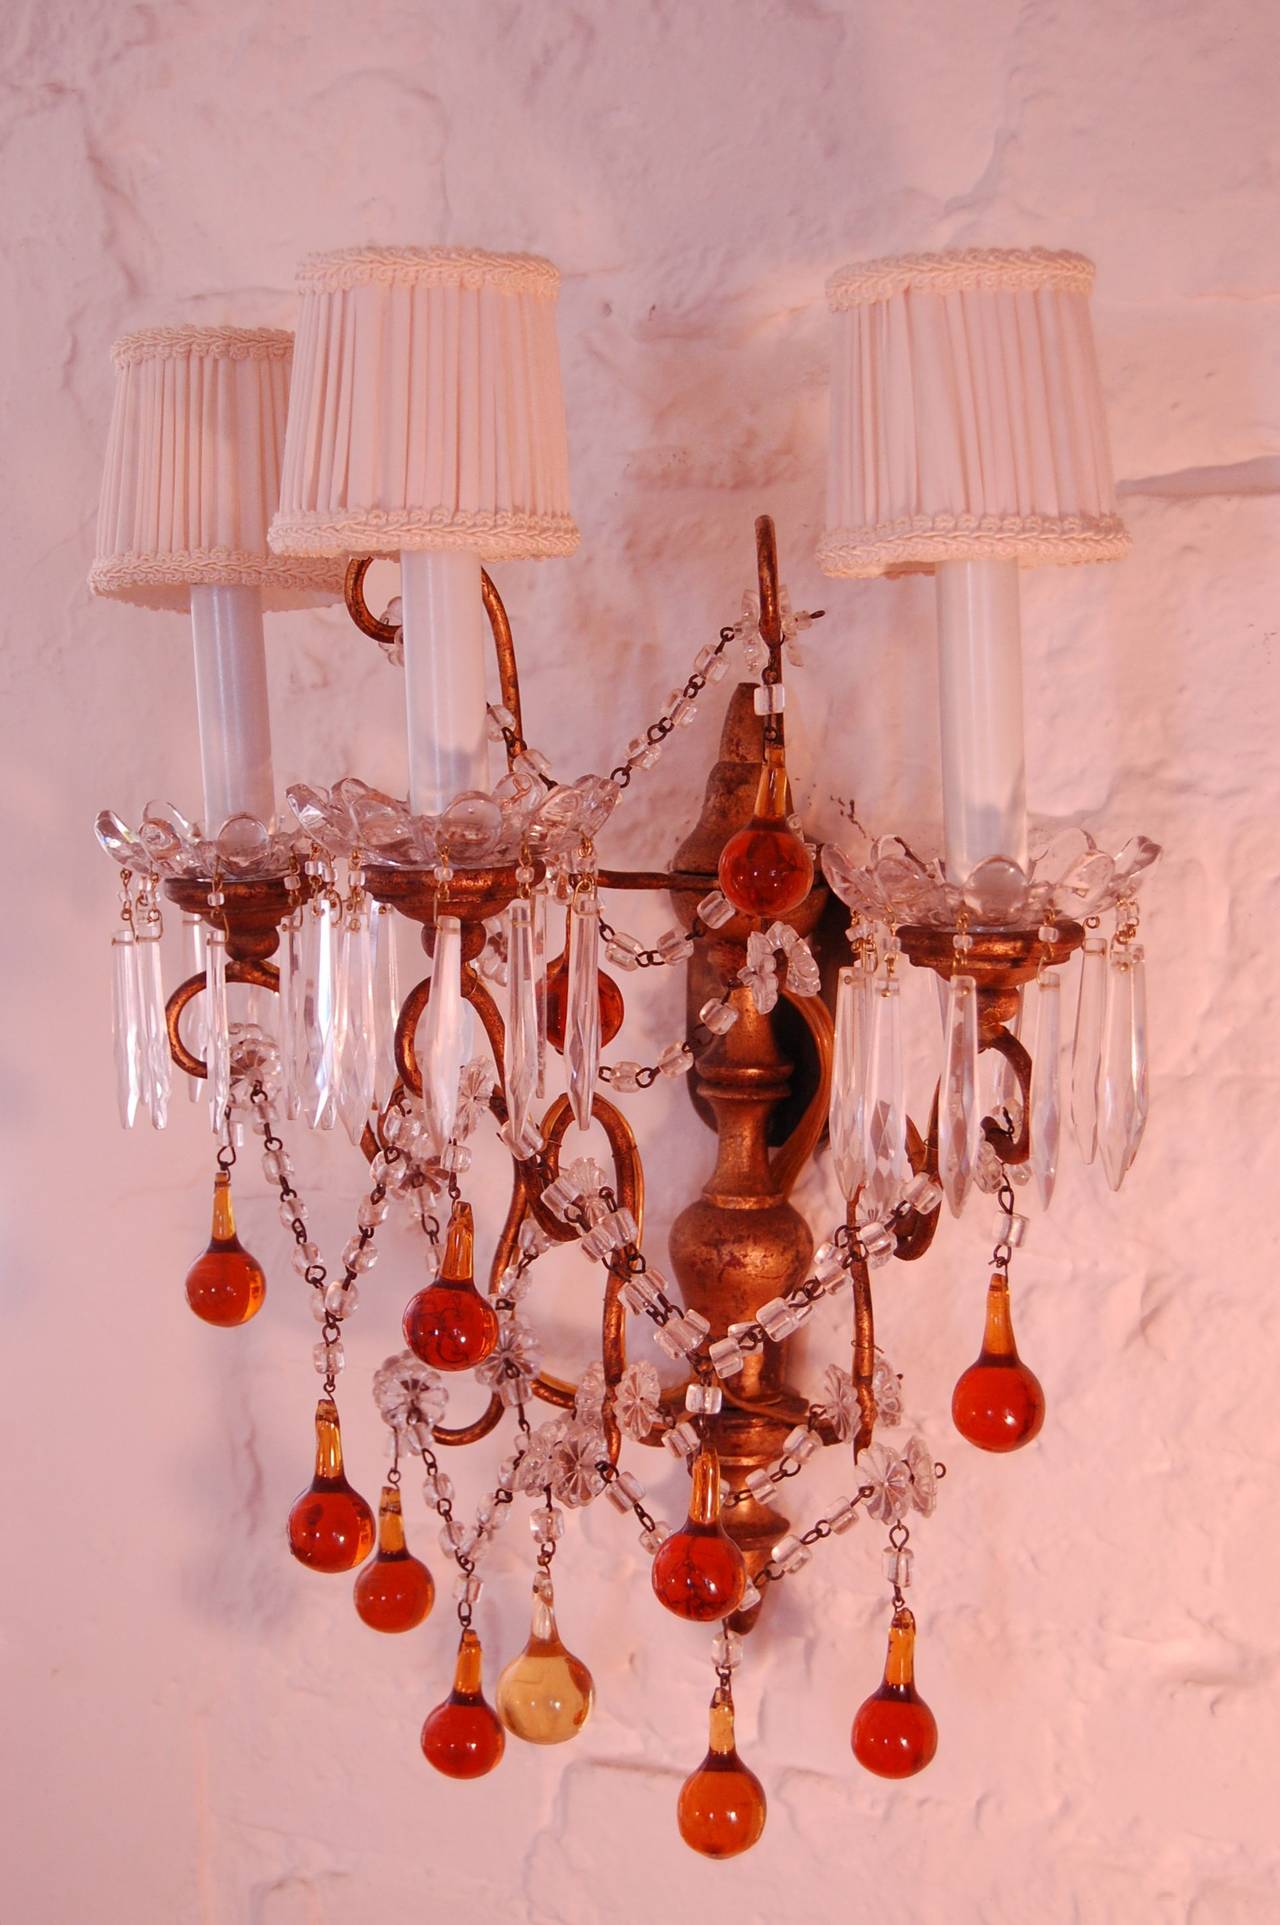 Pair of Italian three light wall sconces with amber glass drops, strands of clear glass beads and glass bobache. The turned wood and gilt back plate has a thin plate to conceal the electrical box in the wall. Possibly early 20th century.